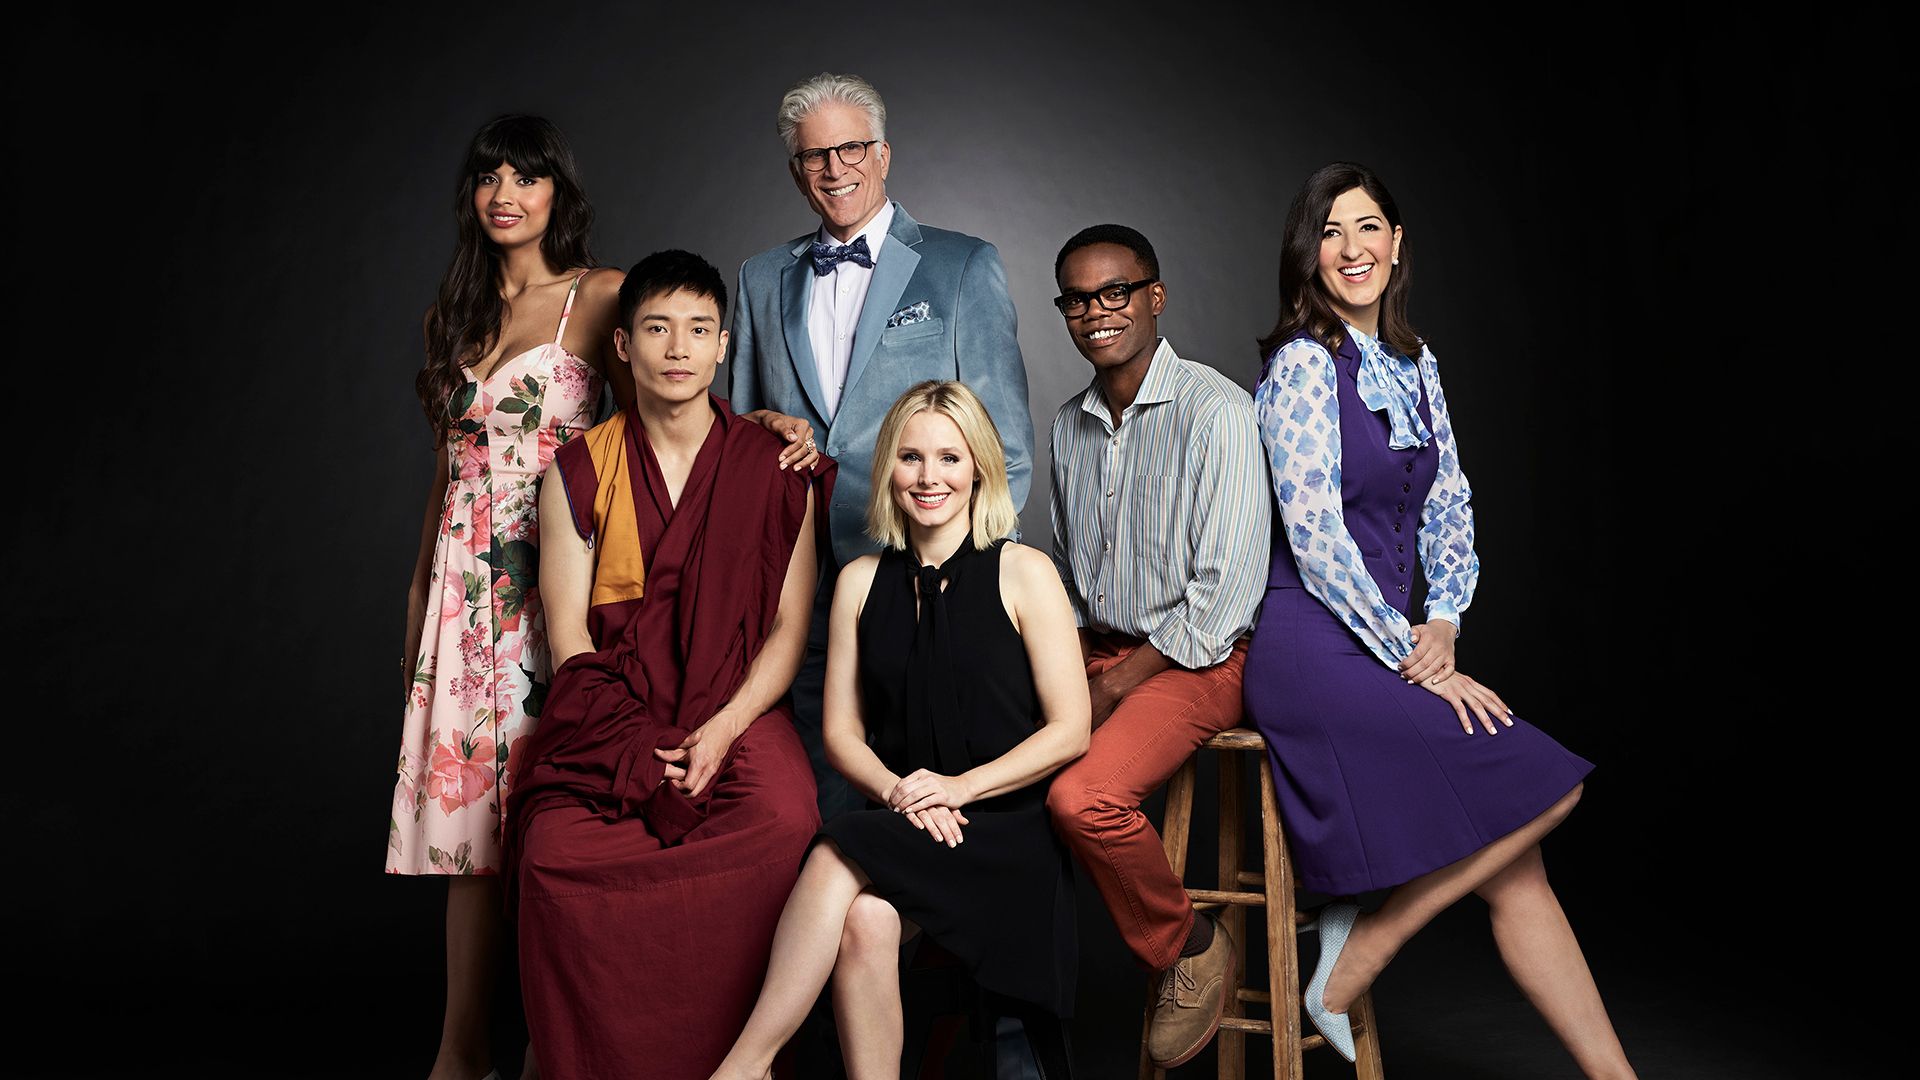 The Good Place background